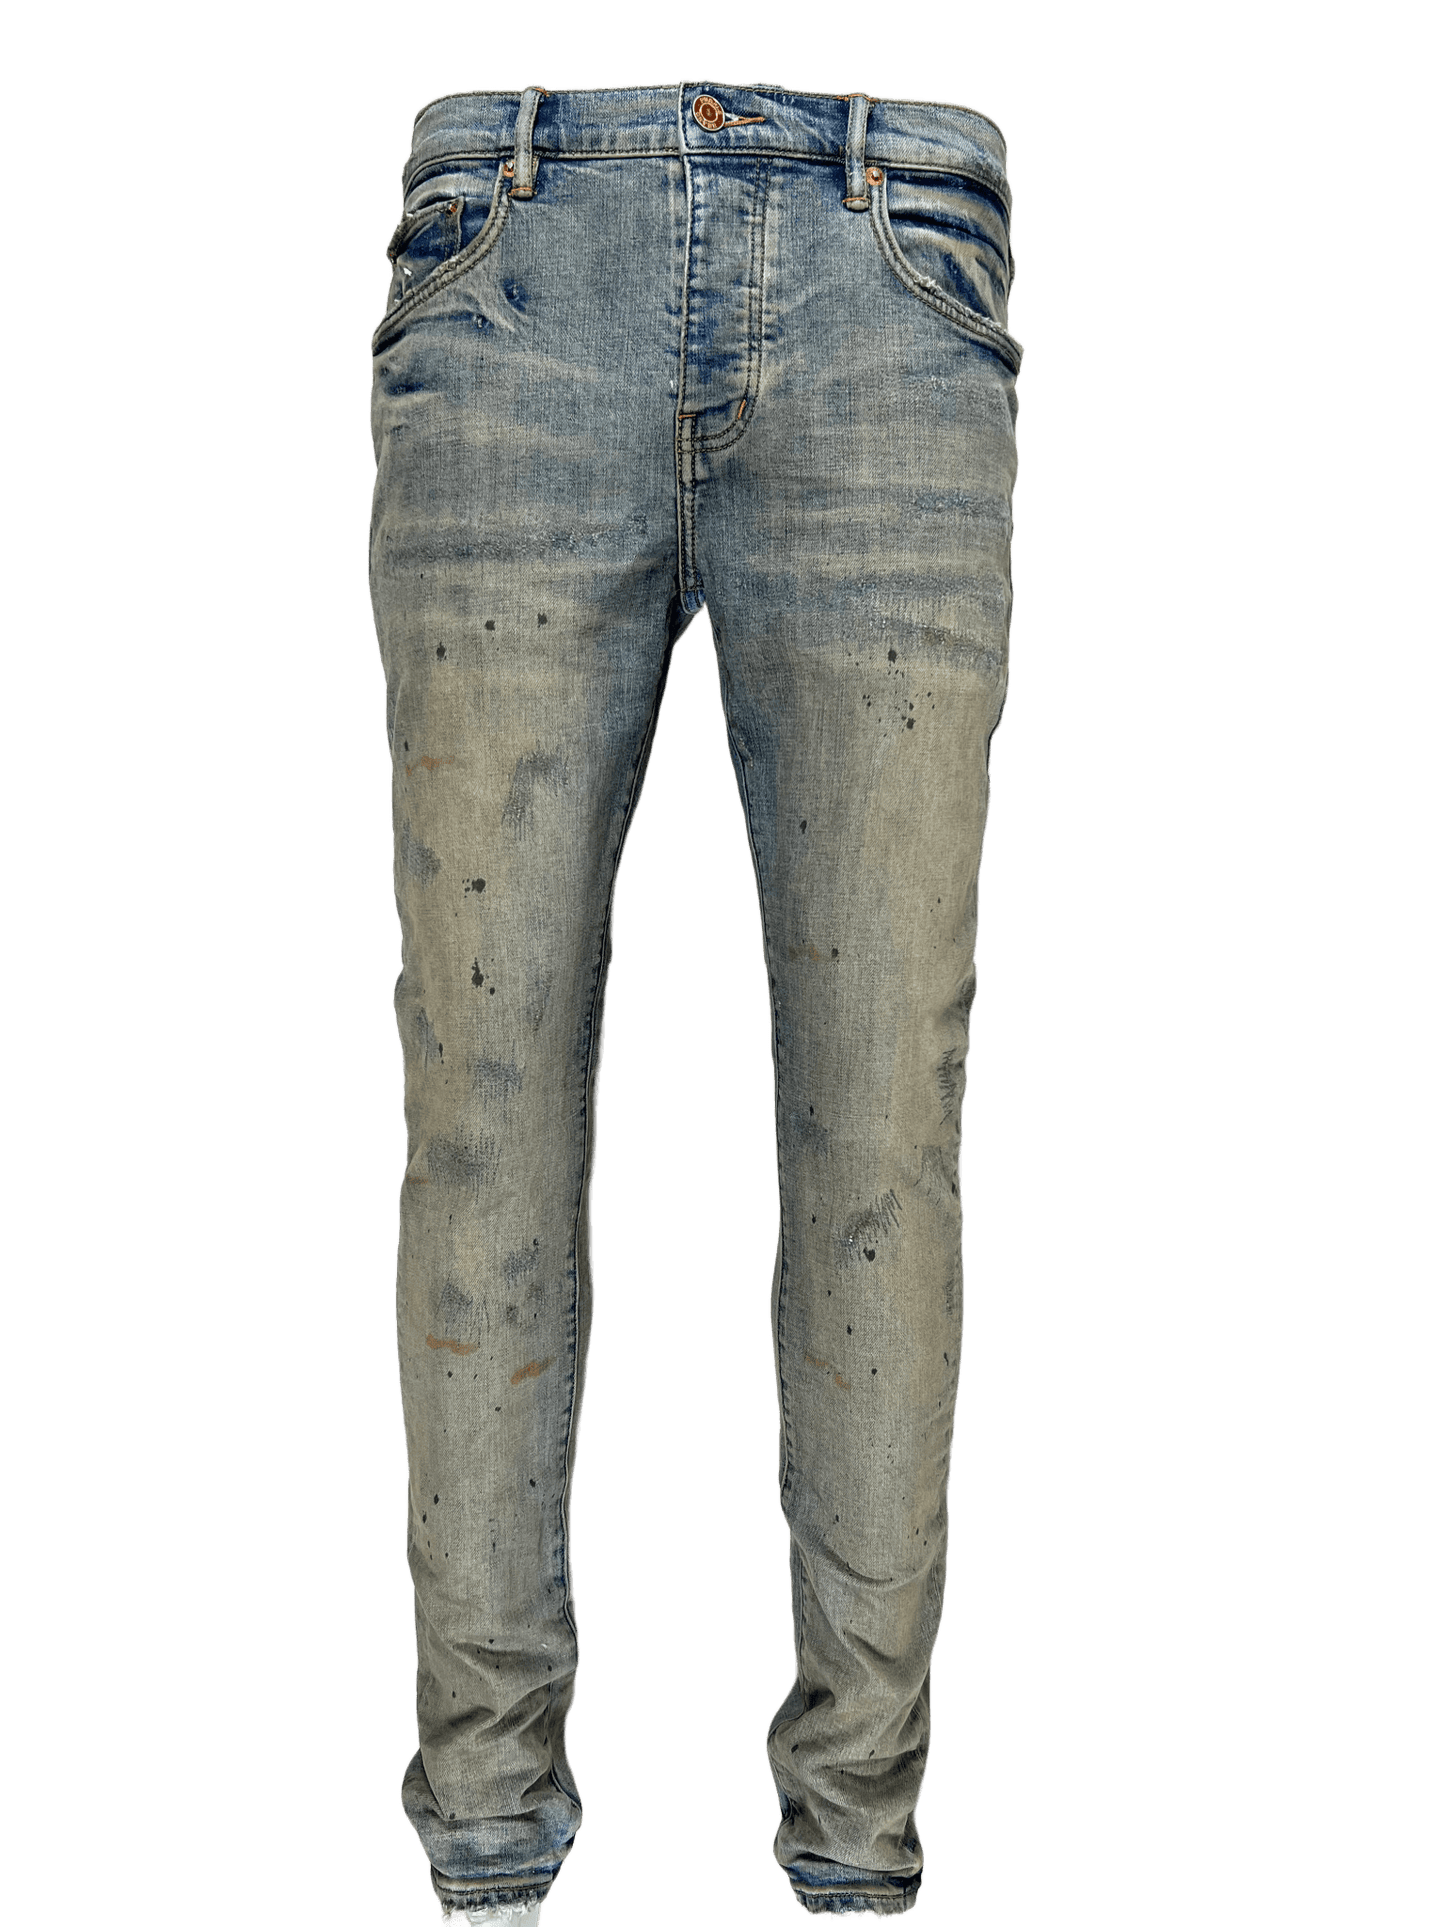 A pair of PURPLE BRAND jeans with stains on them.